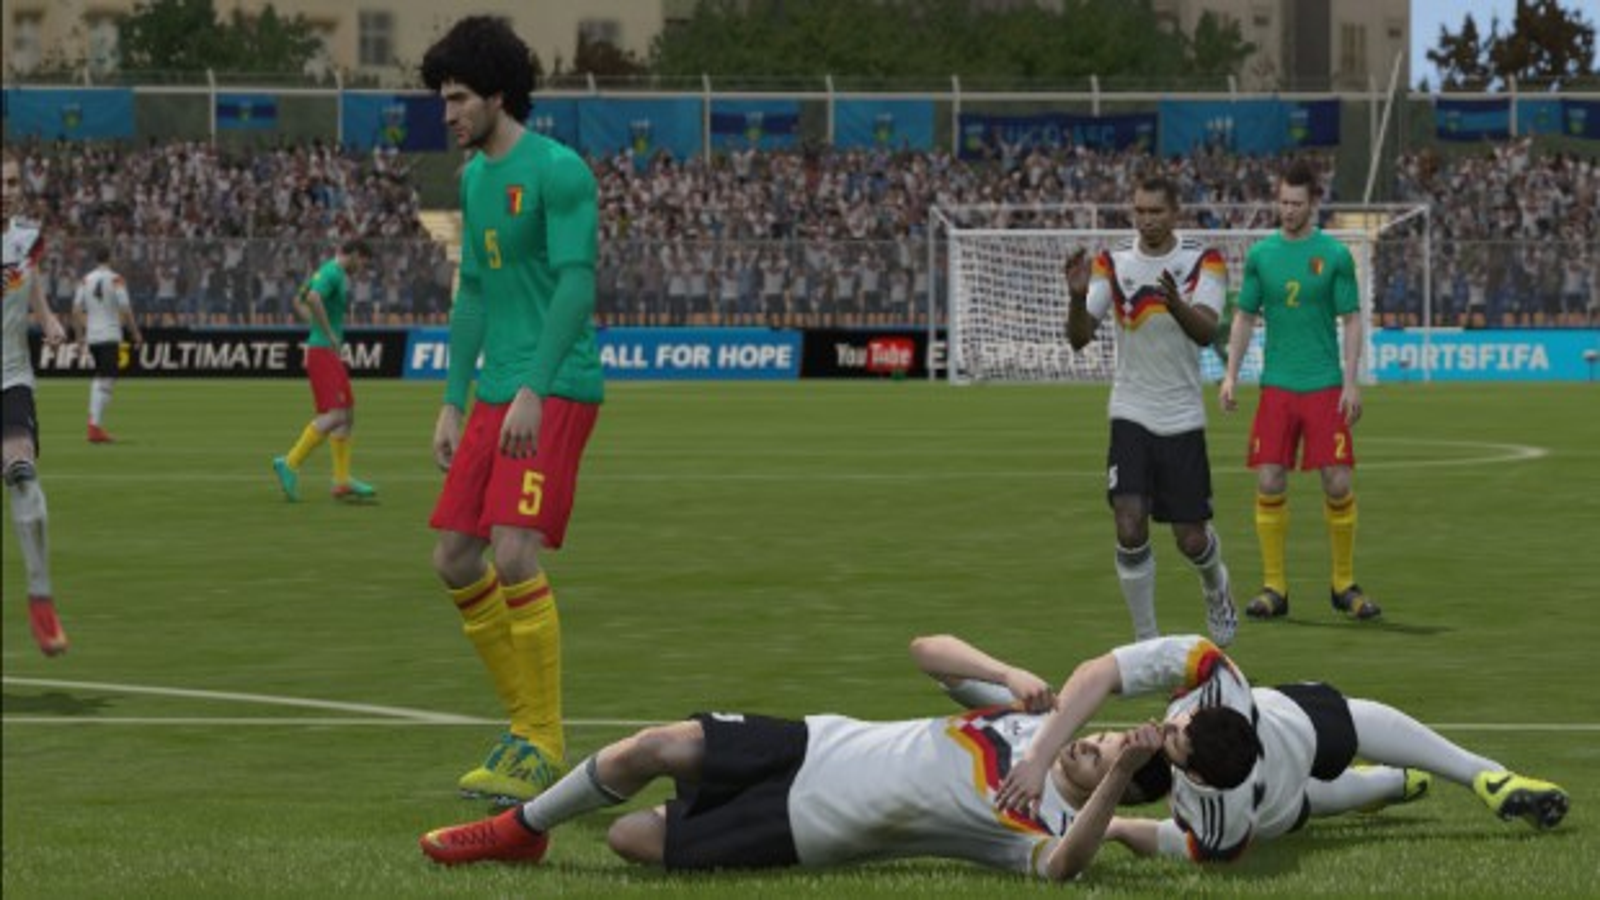 EA limits player prices on FIFA 15 Ultimate Team Mode